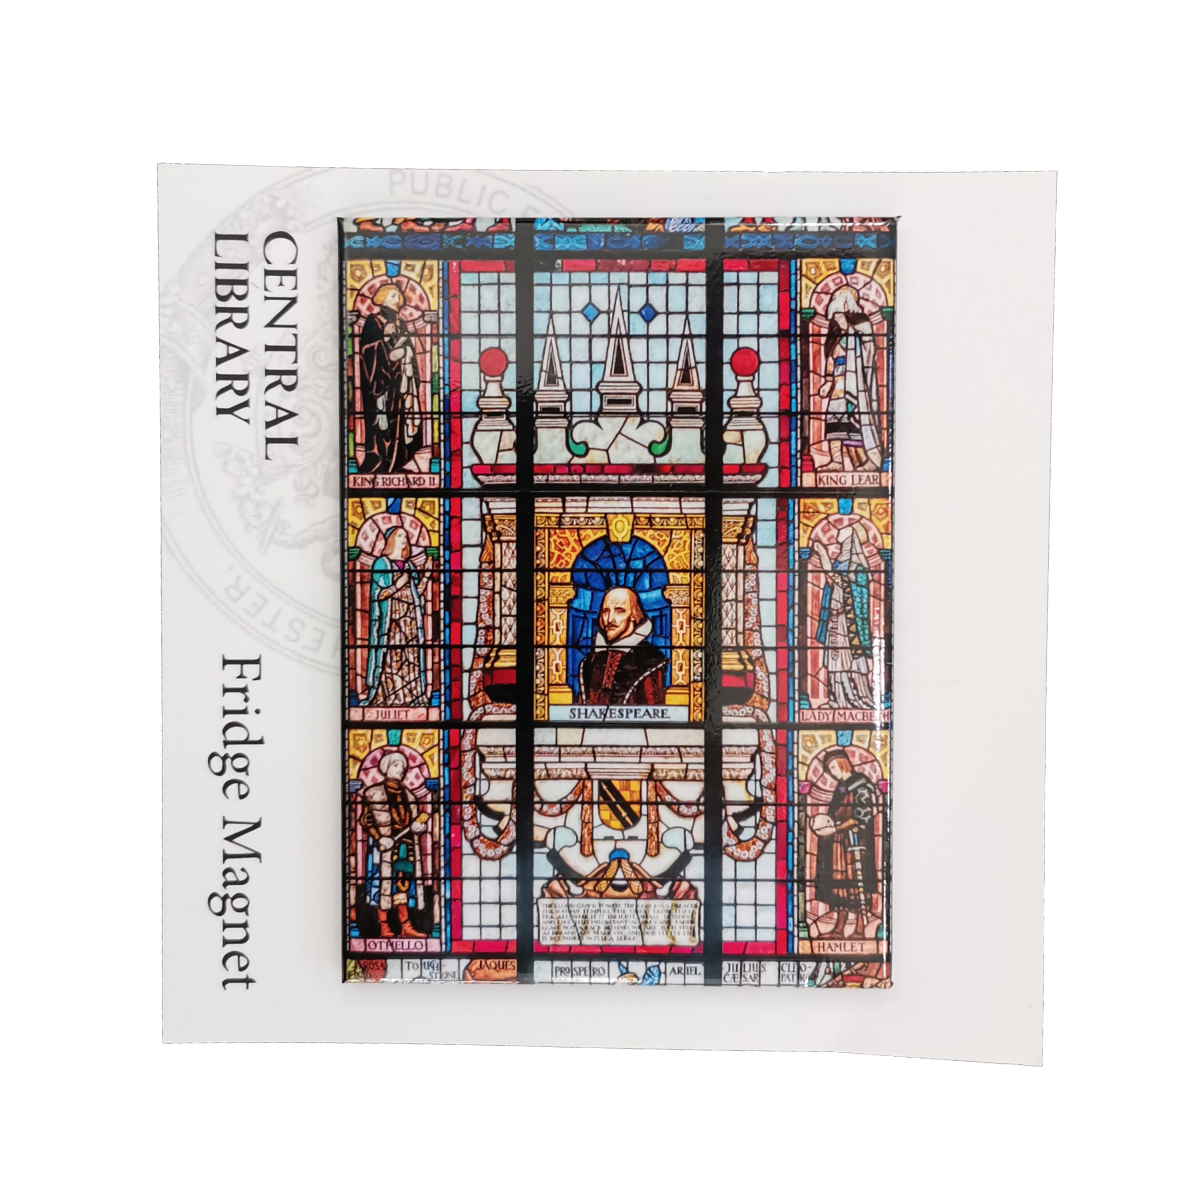 A fridge magnet featuring an image of the Shakespeare themed stained glass window of Central Library.